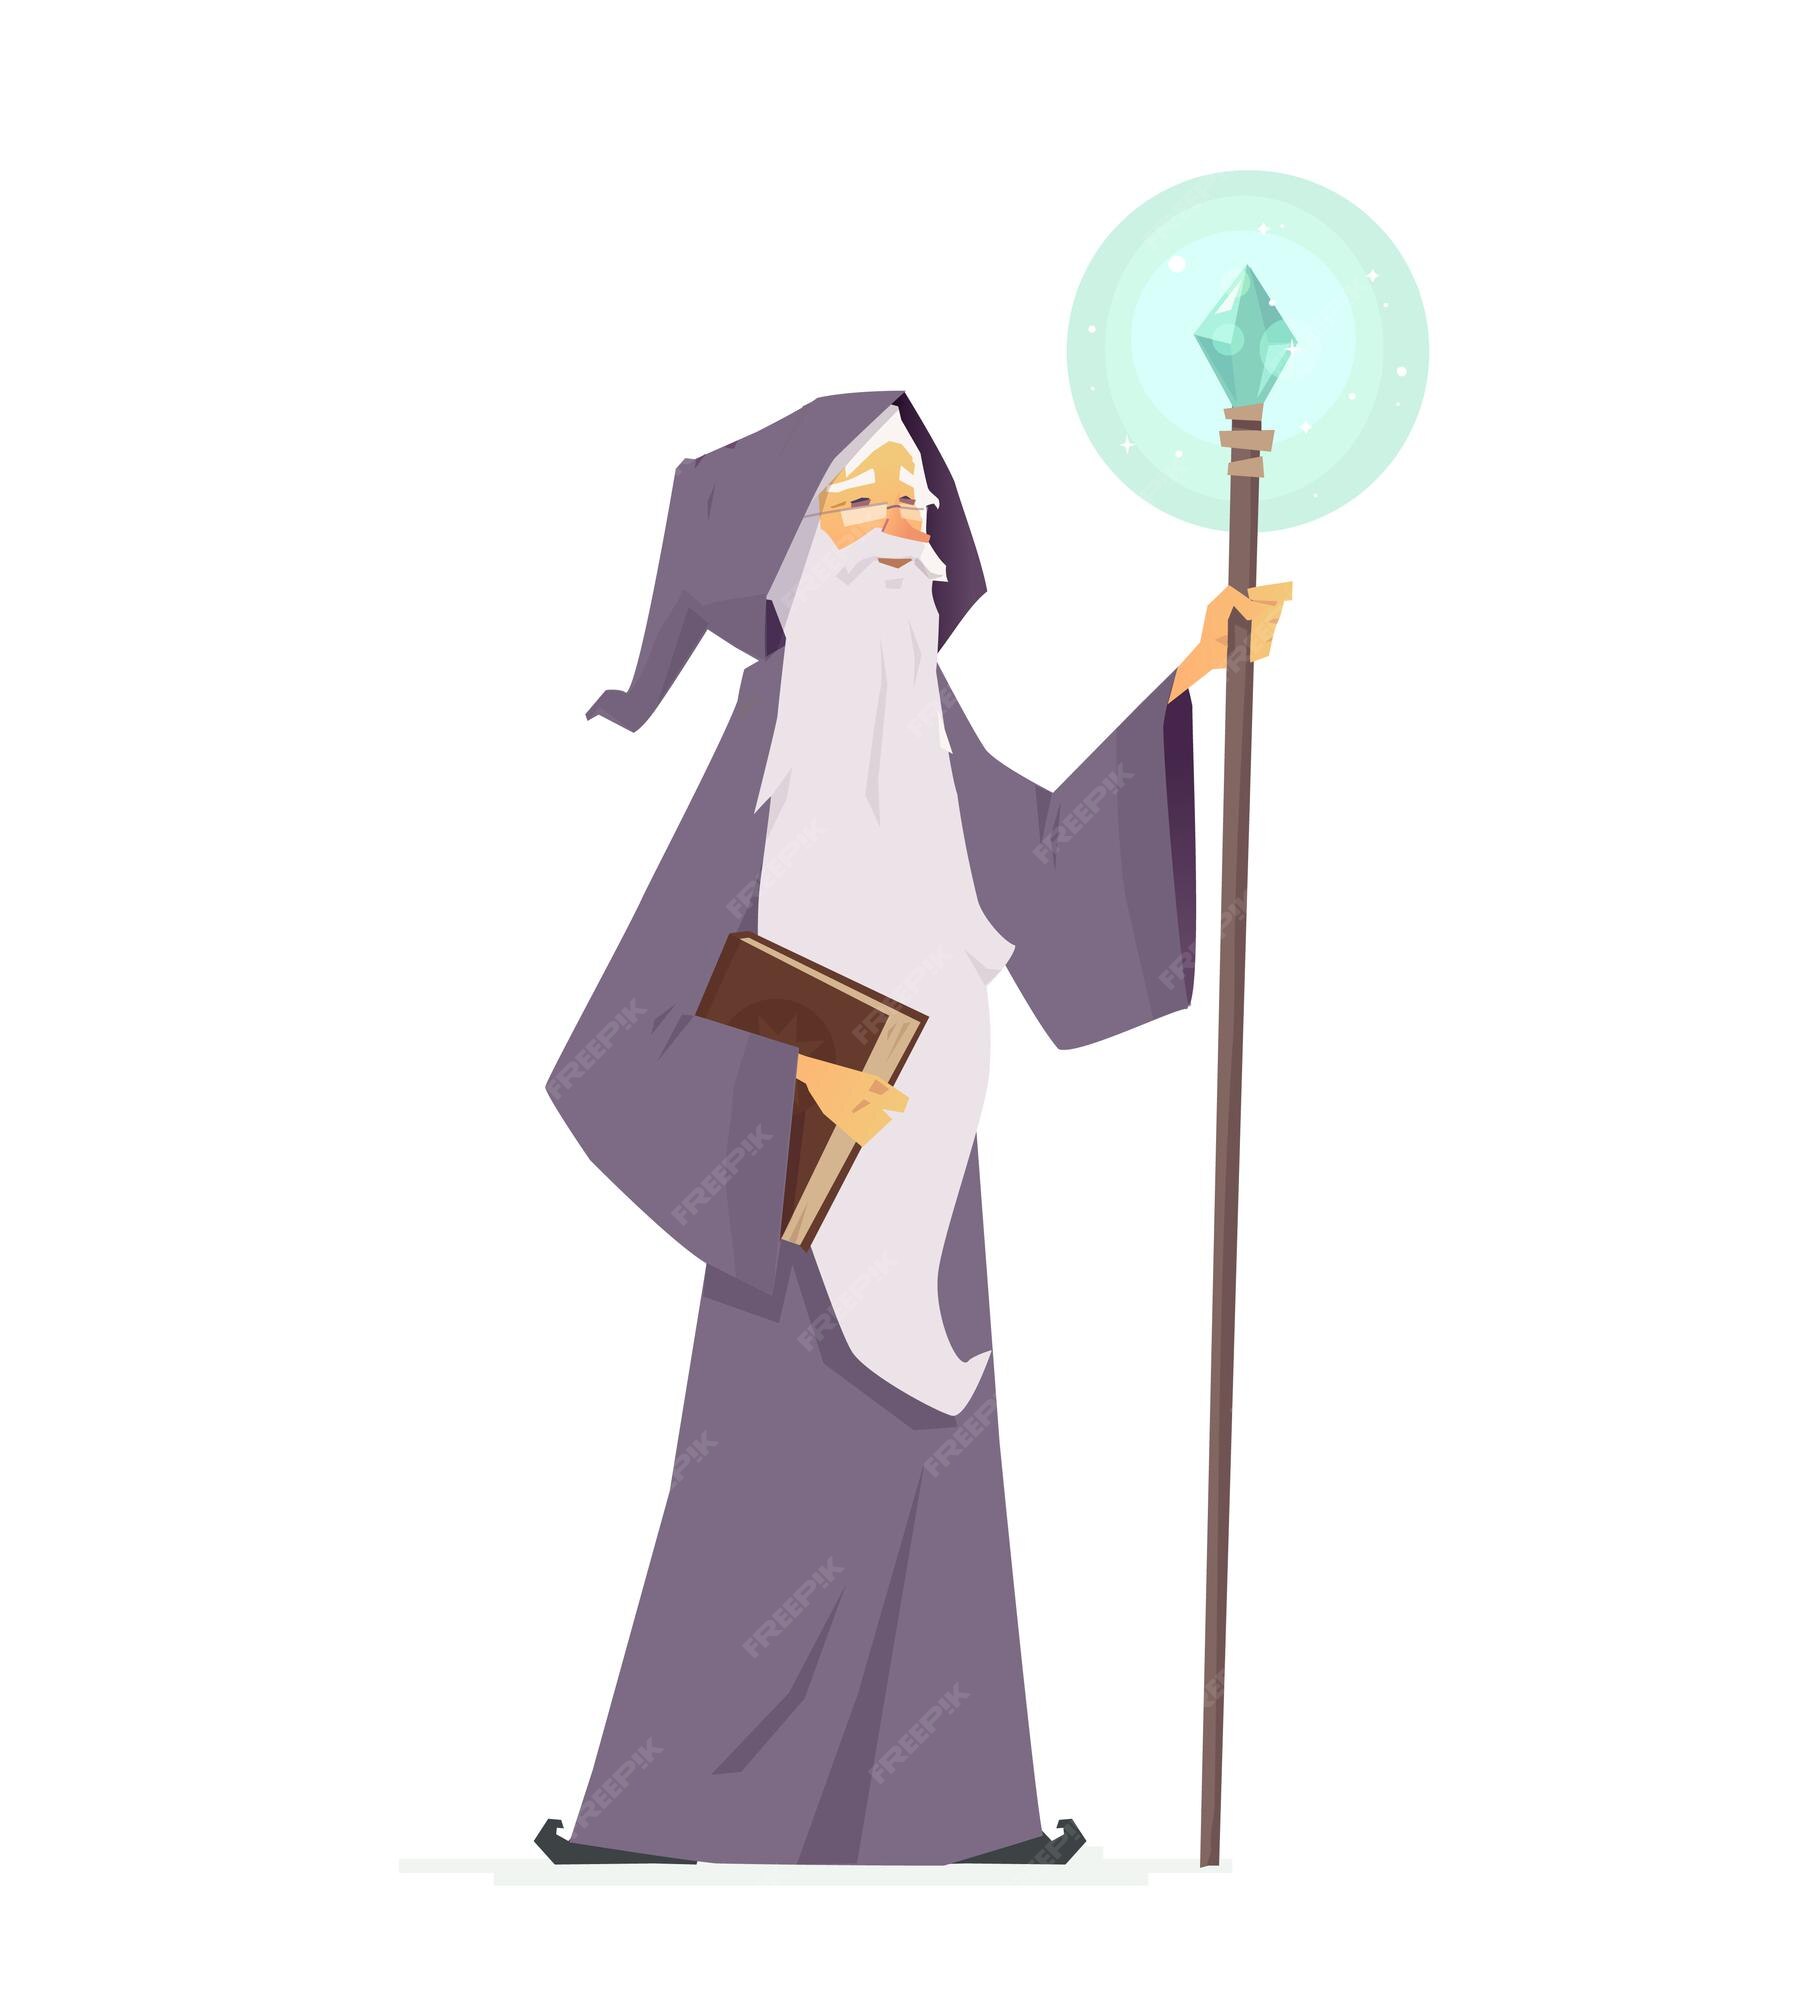 Premium Vector | Wizard with magic book and wand - cartoon people  characters illustration isolated on white background. an image of an old  kind magician with long white beard in a mantle